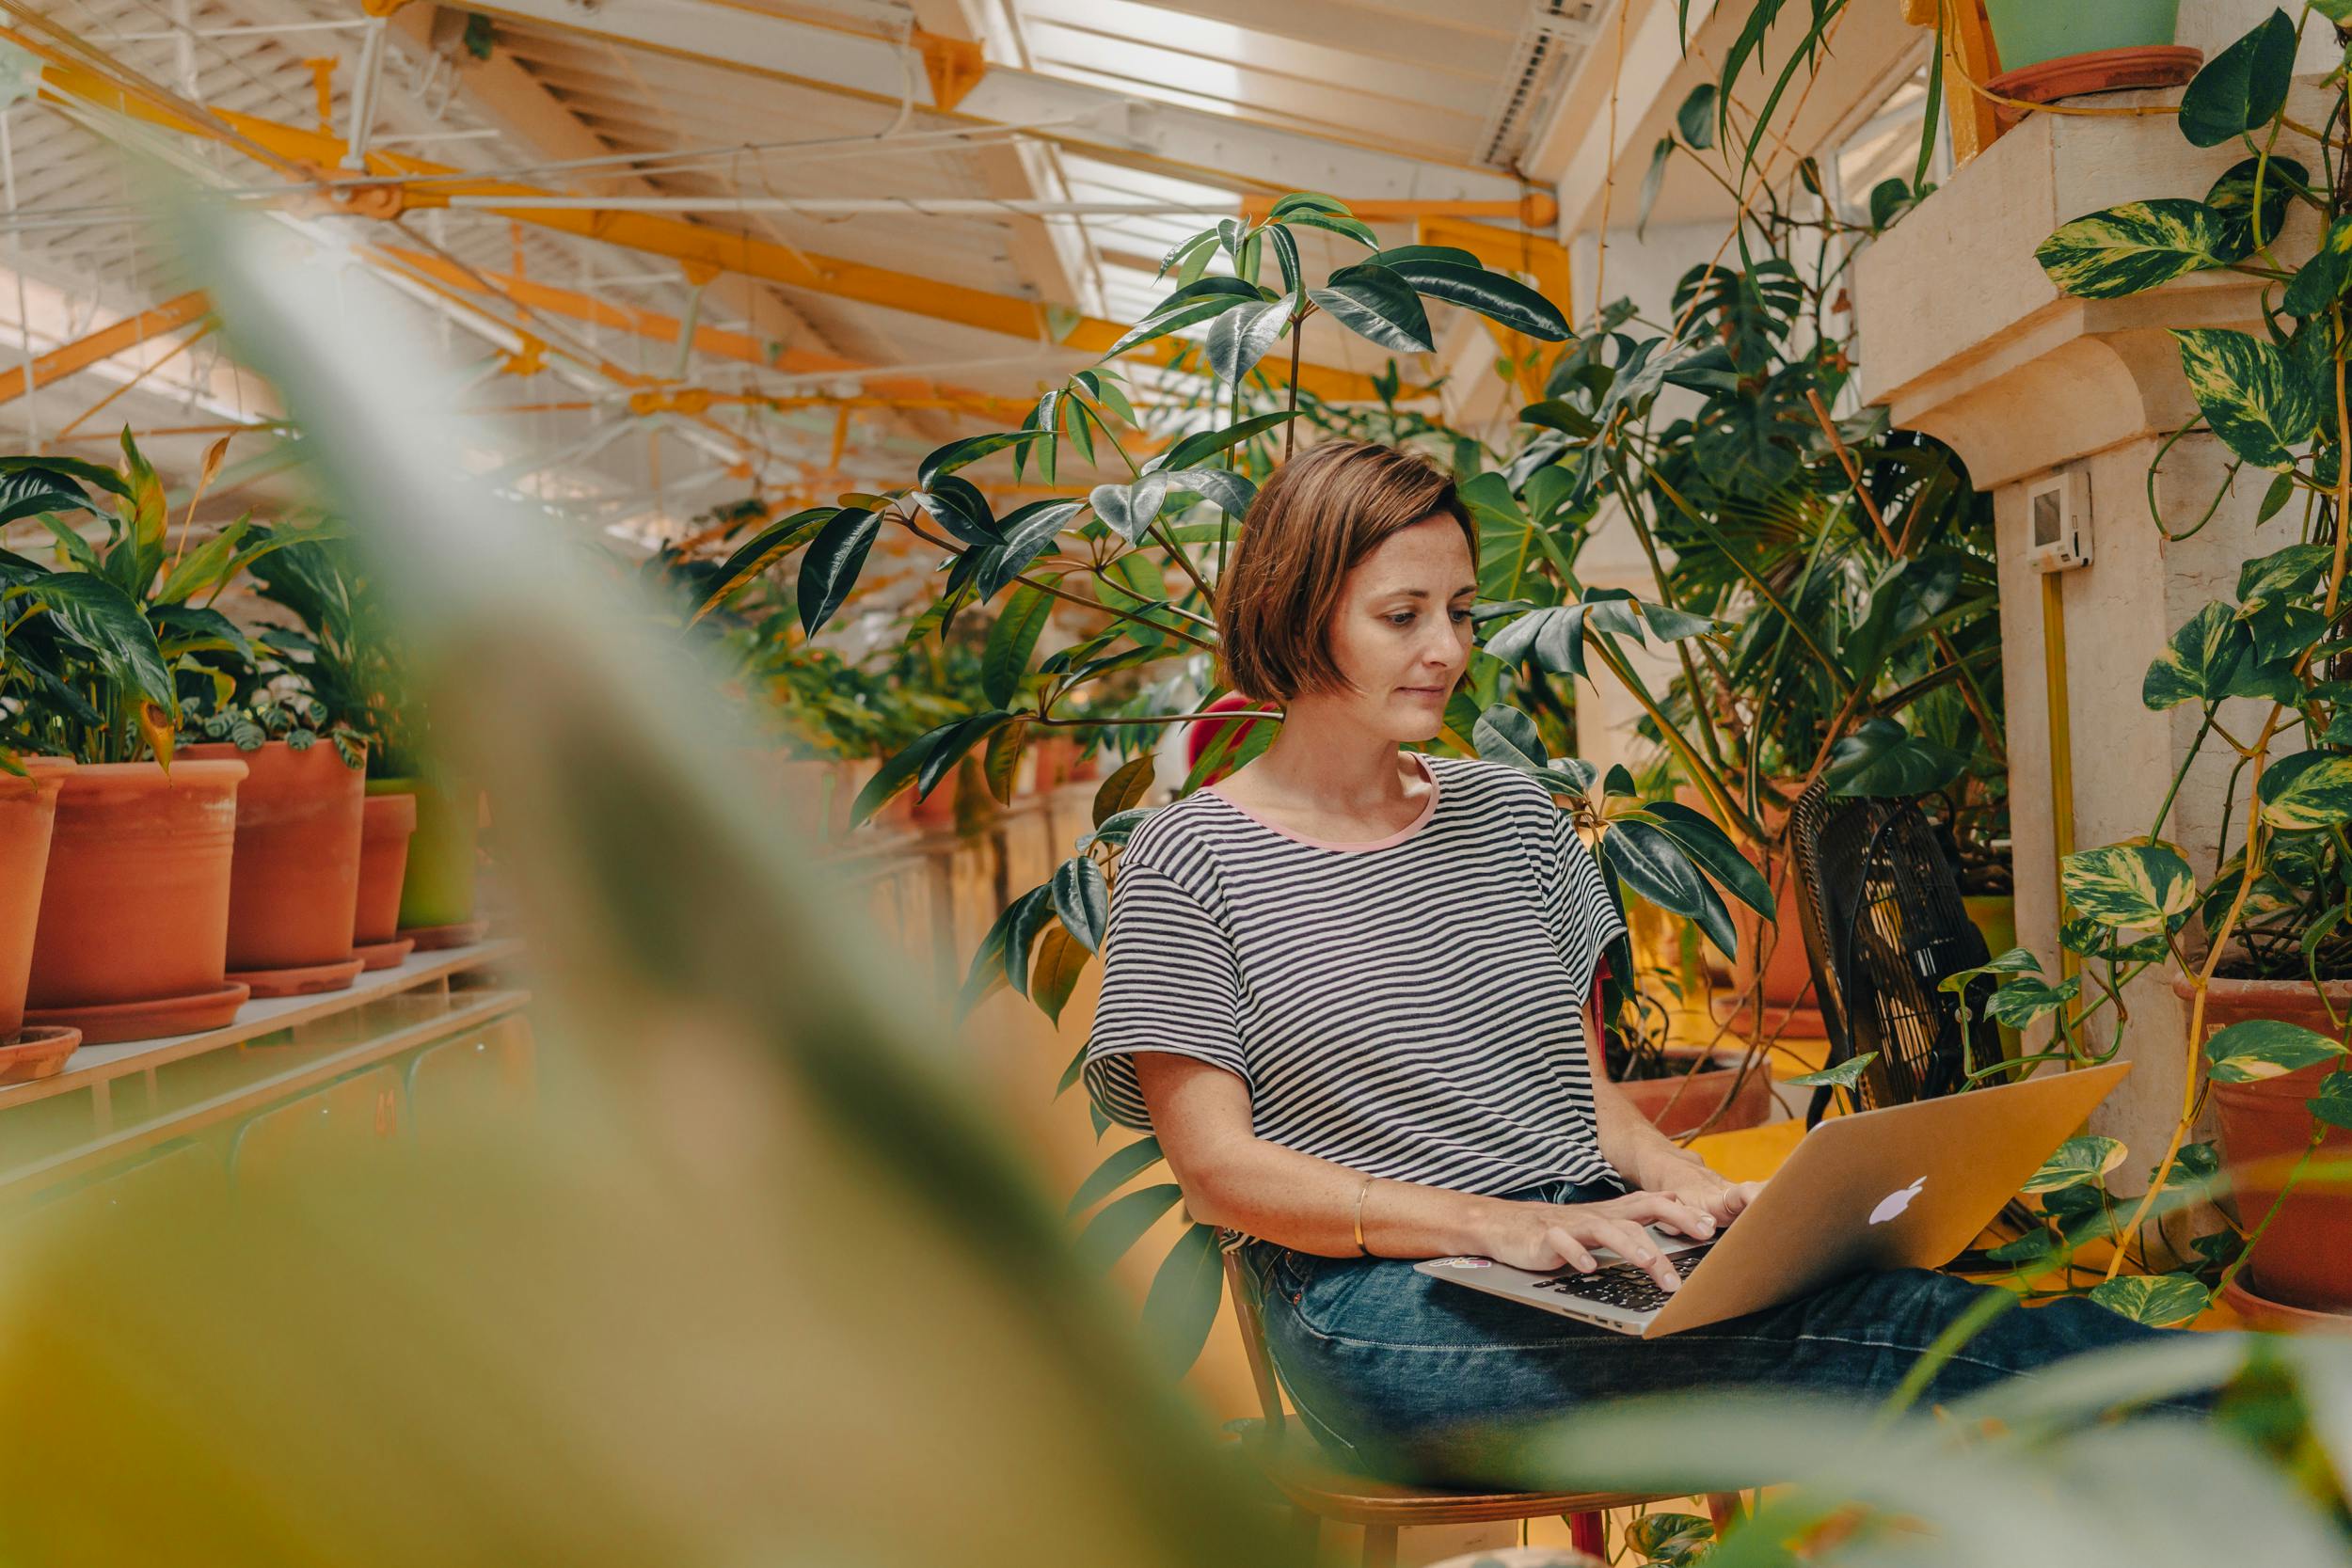 Woman sitting on a chair and looking at her laptop, surrounded by vased plants